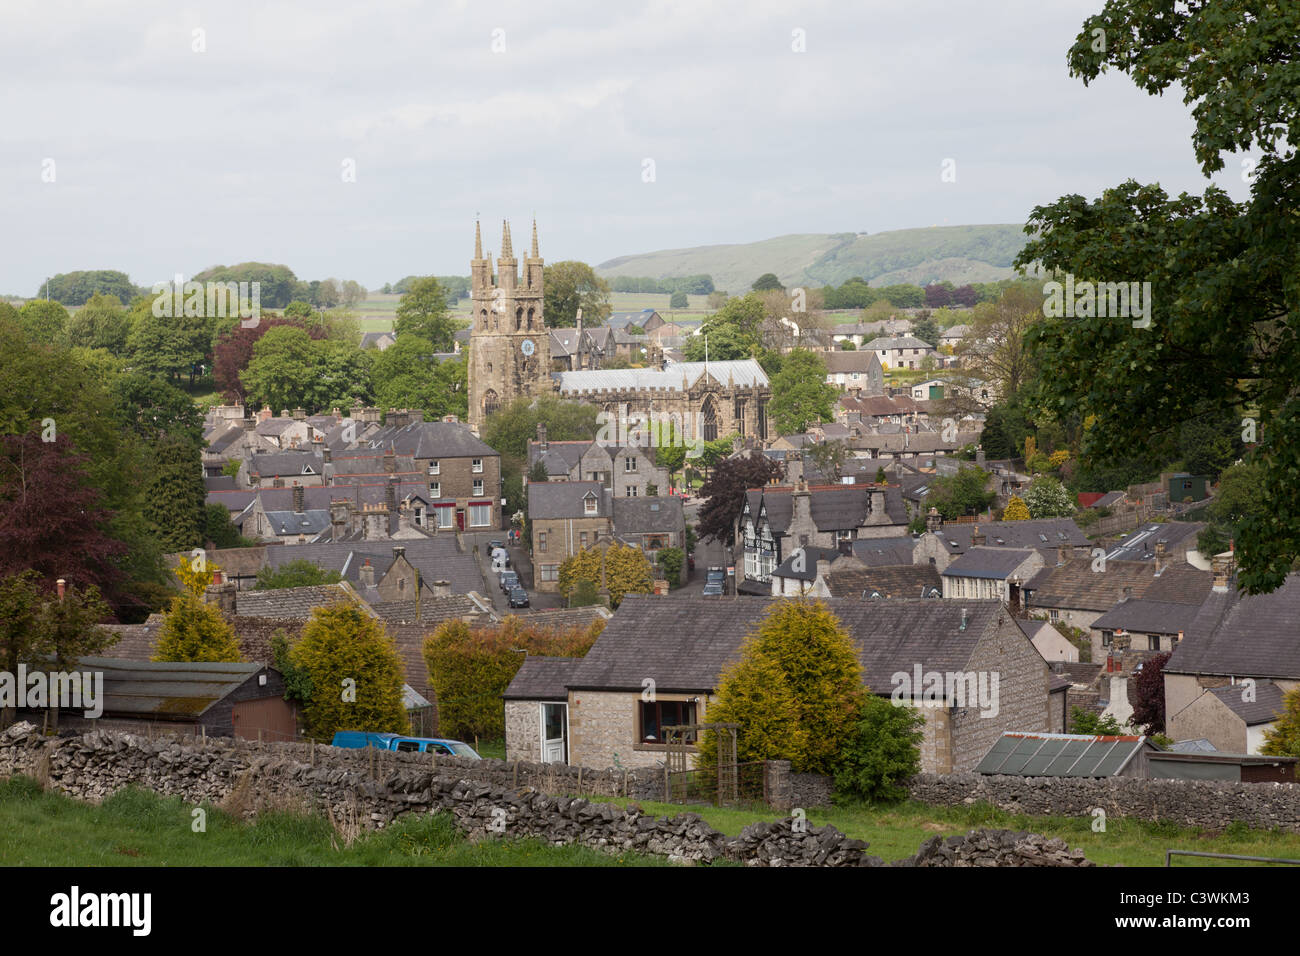 Tideswell a village in Derbyshire,famous for its 14th-century parish church,the 'Cathedral of the Peak' Stock Photo